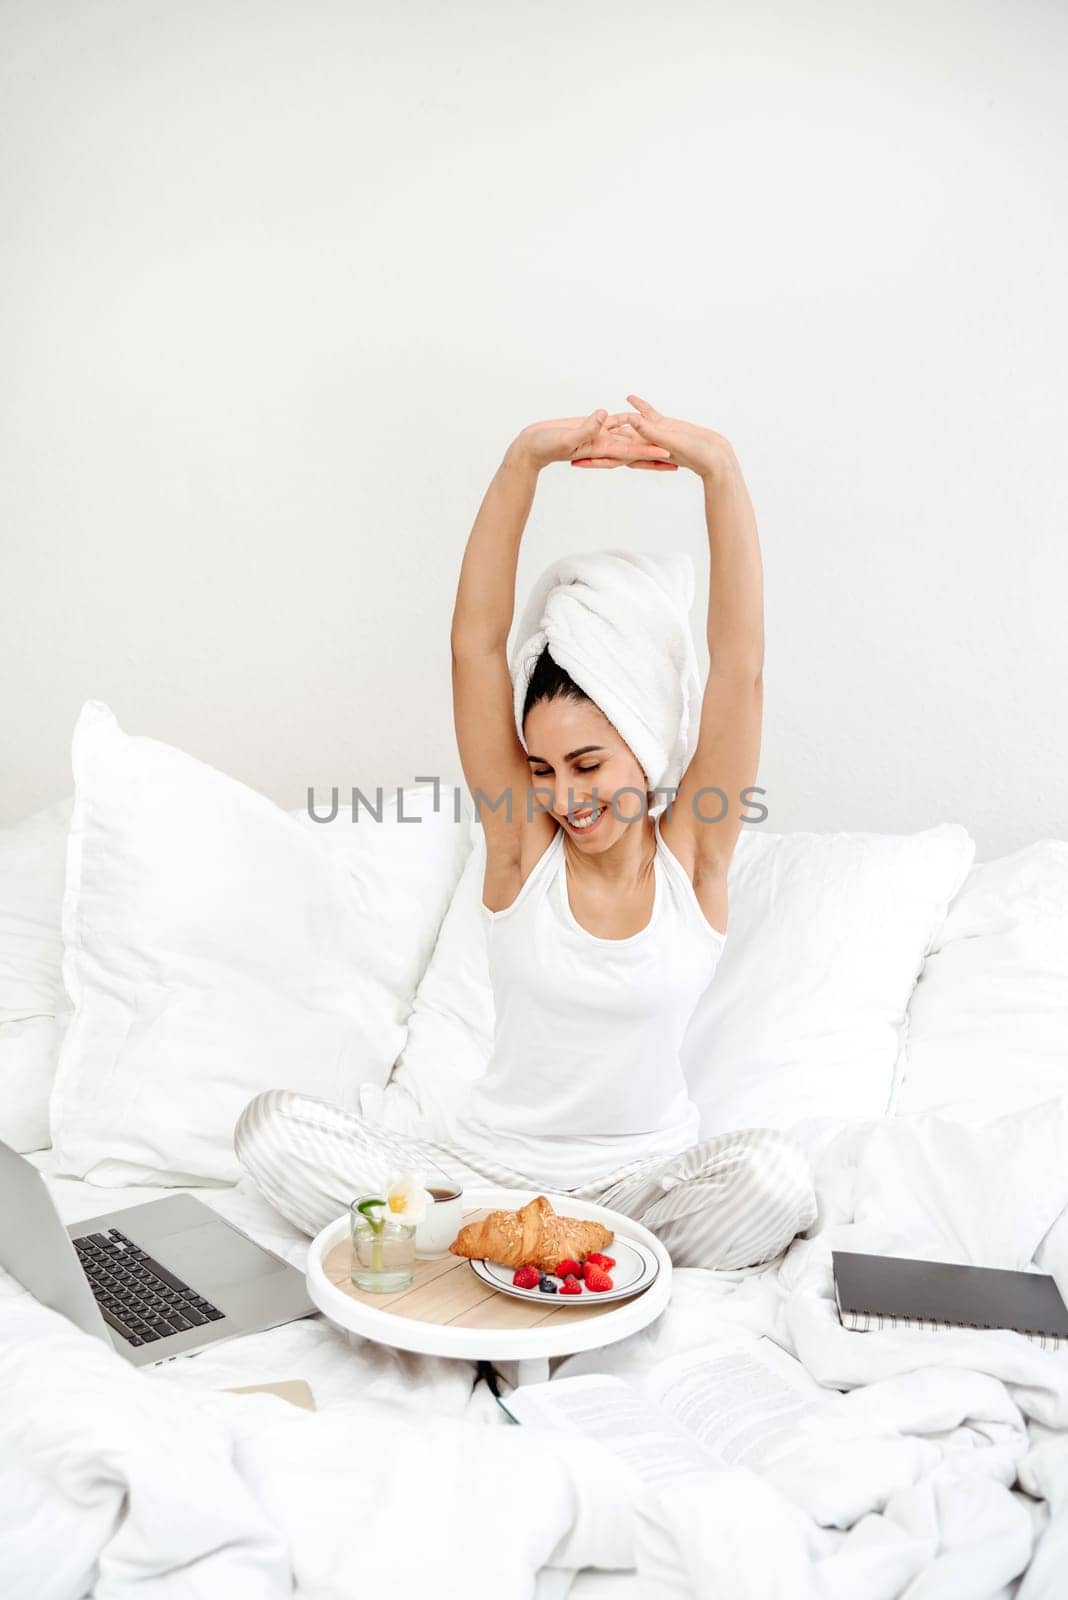 Happy woman stretching in bed in the morning with breakfast tray. The girl is ready to start work and perform tasks after a delicious healthy breakfast. A towel is wrapped around the woman's head.